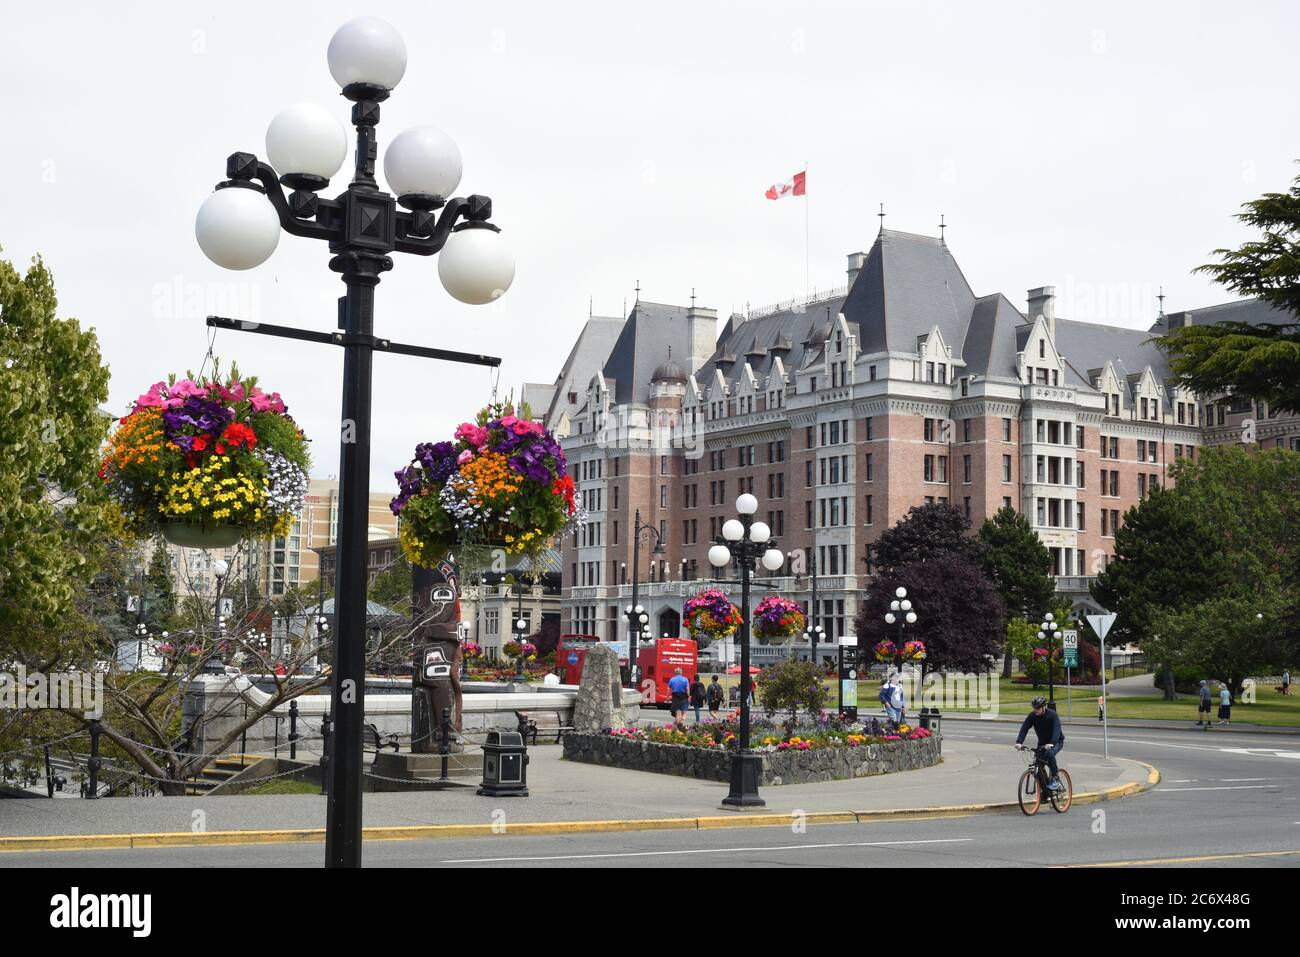 A view of hanging flowers baskets and the historic Fairmont Empress Hotel in downtown, Victoria, Britsih Columbia, Canada on Vancouver Island. Stock Photo